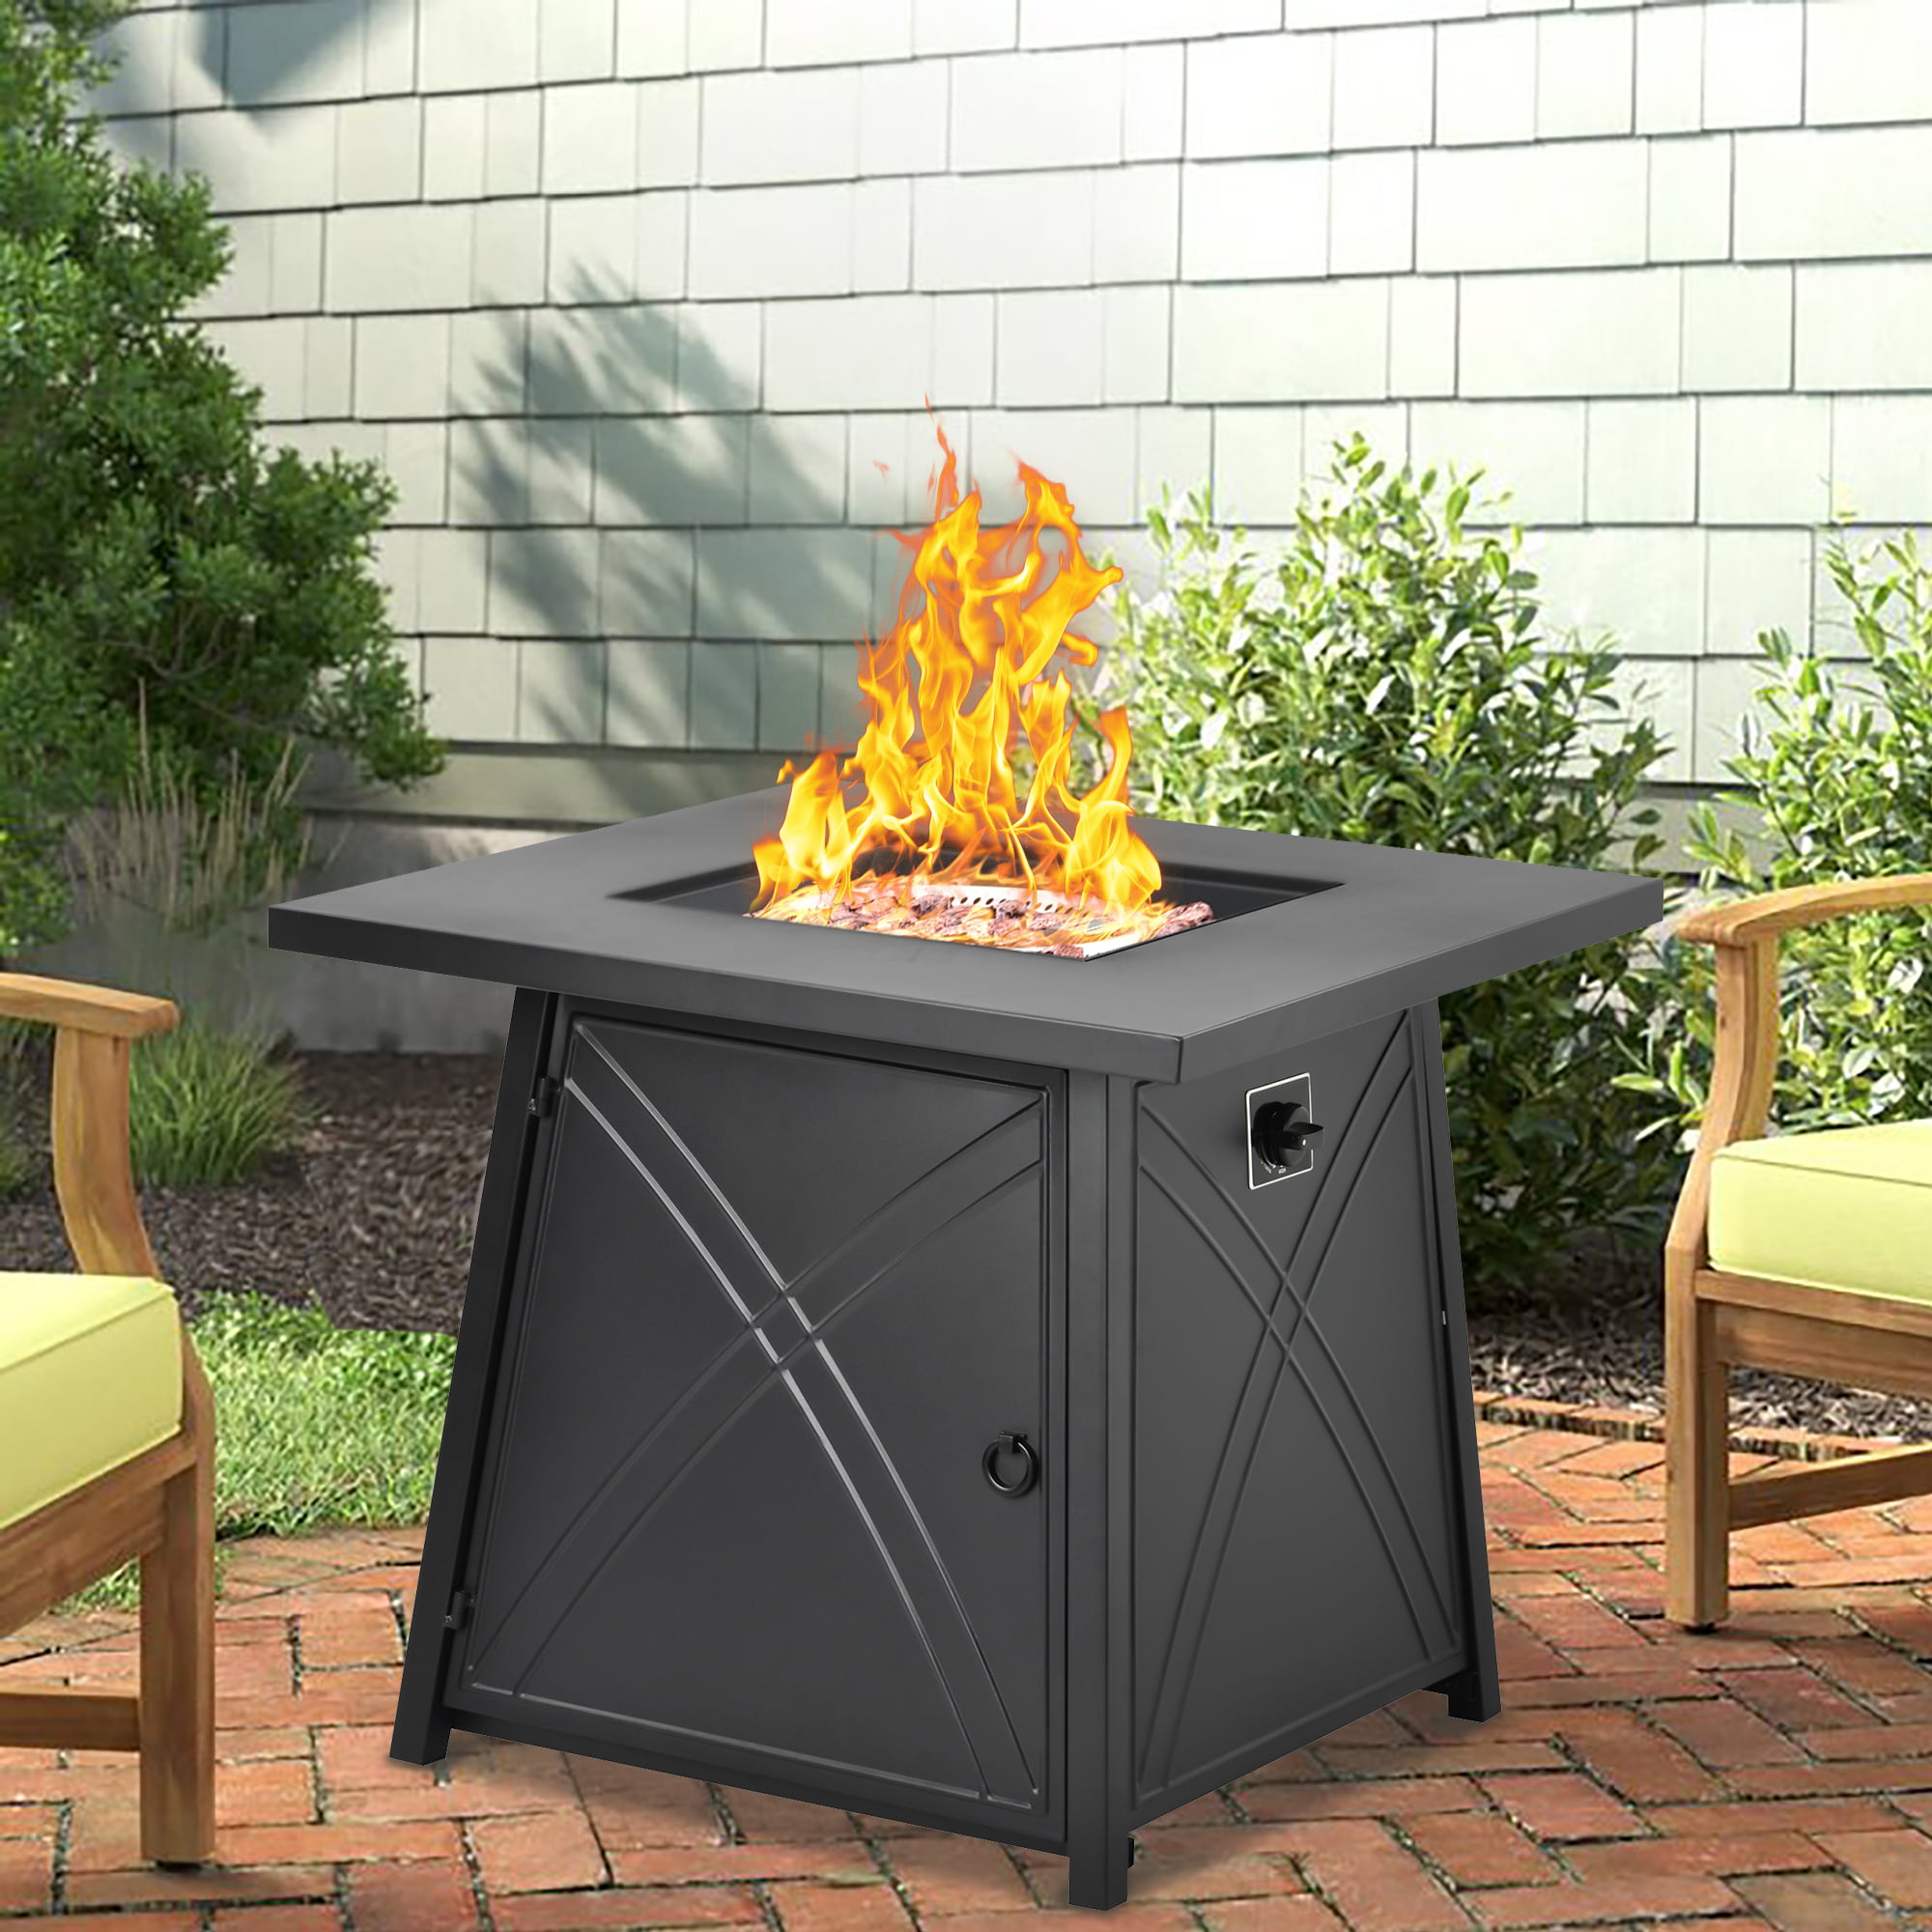 Details about   Wood Burning Fire Pit Outdoor Heater Backyard Patio Deck Stove Fireplace bowl 